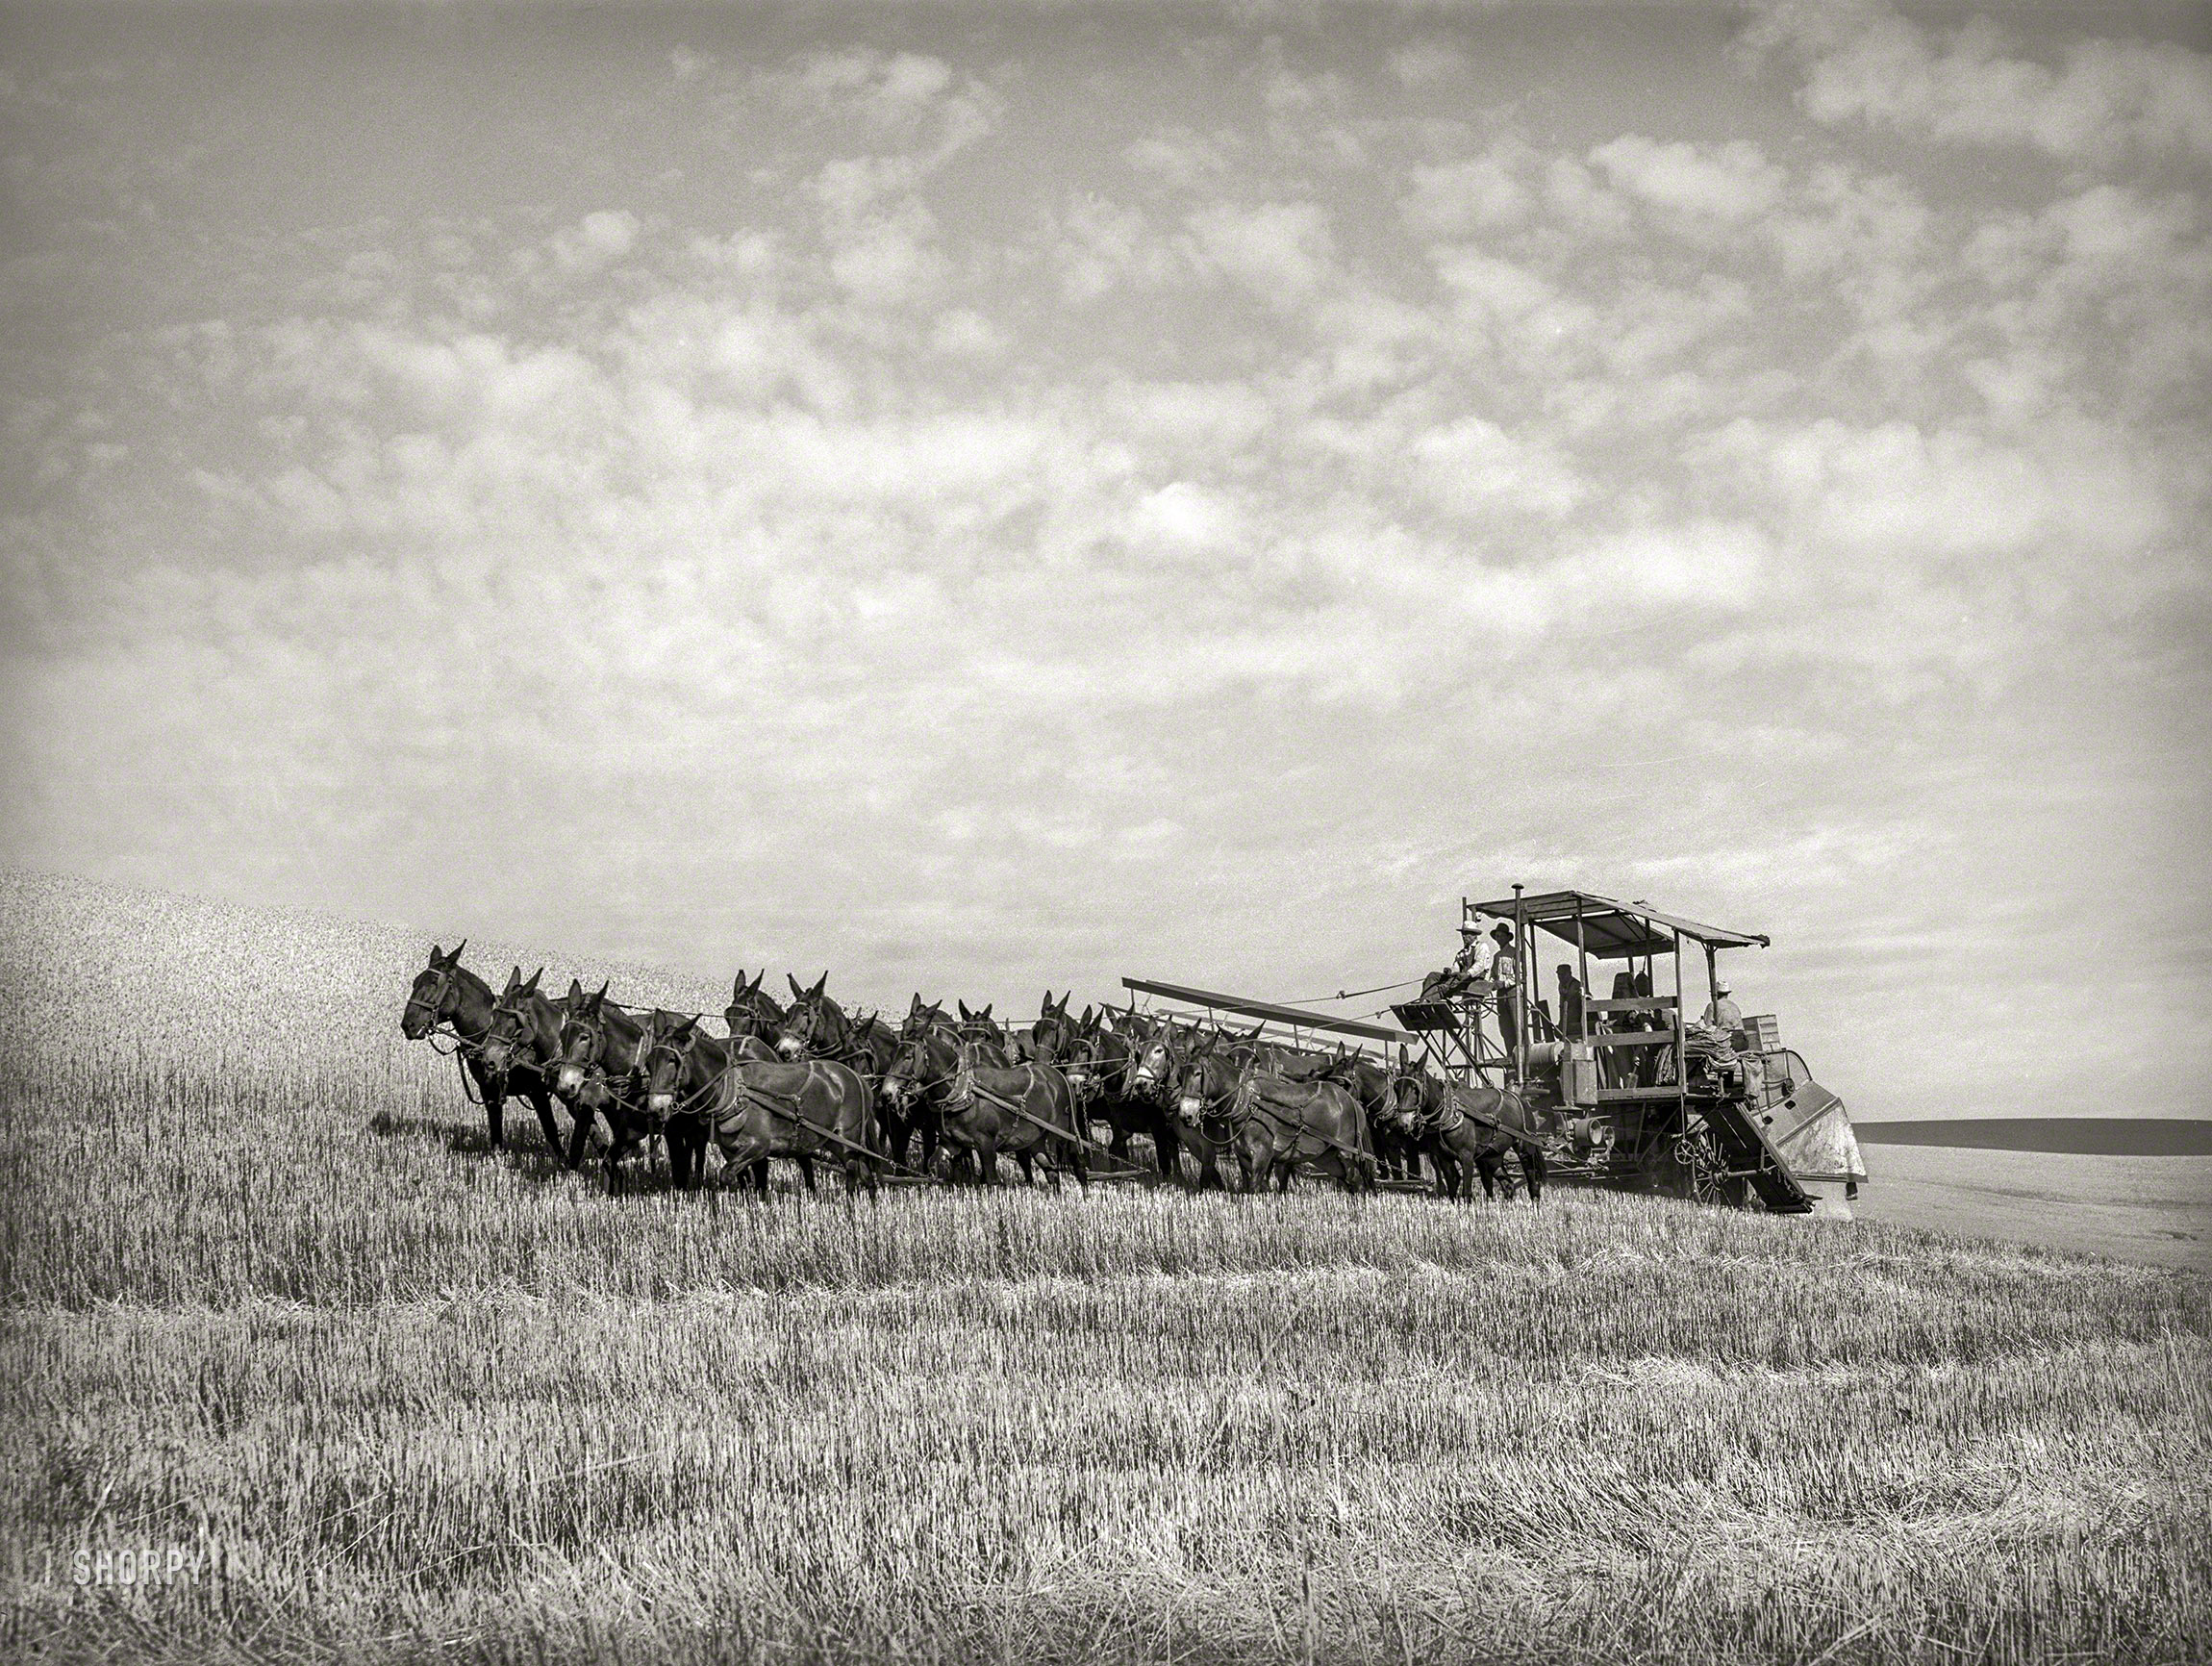 July 1941. "Twenty-mule-team-drawn combine. Walla Walla County, Washington. This outfit gets to work at 6 in the morning. Knocks off at 11 for rest, food and water for mules and men, goes back to work at 1 and works till 6." Medium format negative by Russell Lee for the Farm Security Administration. View full size.